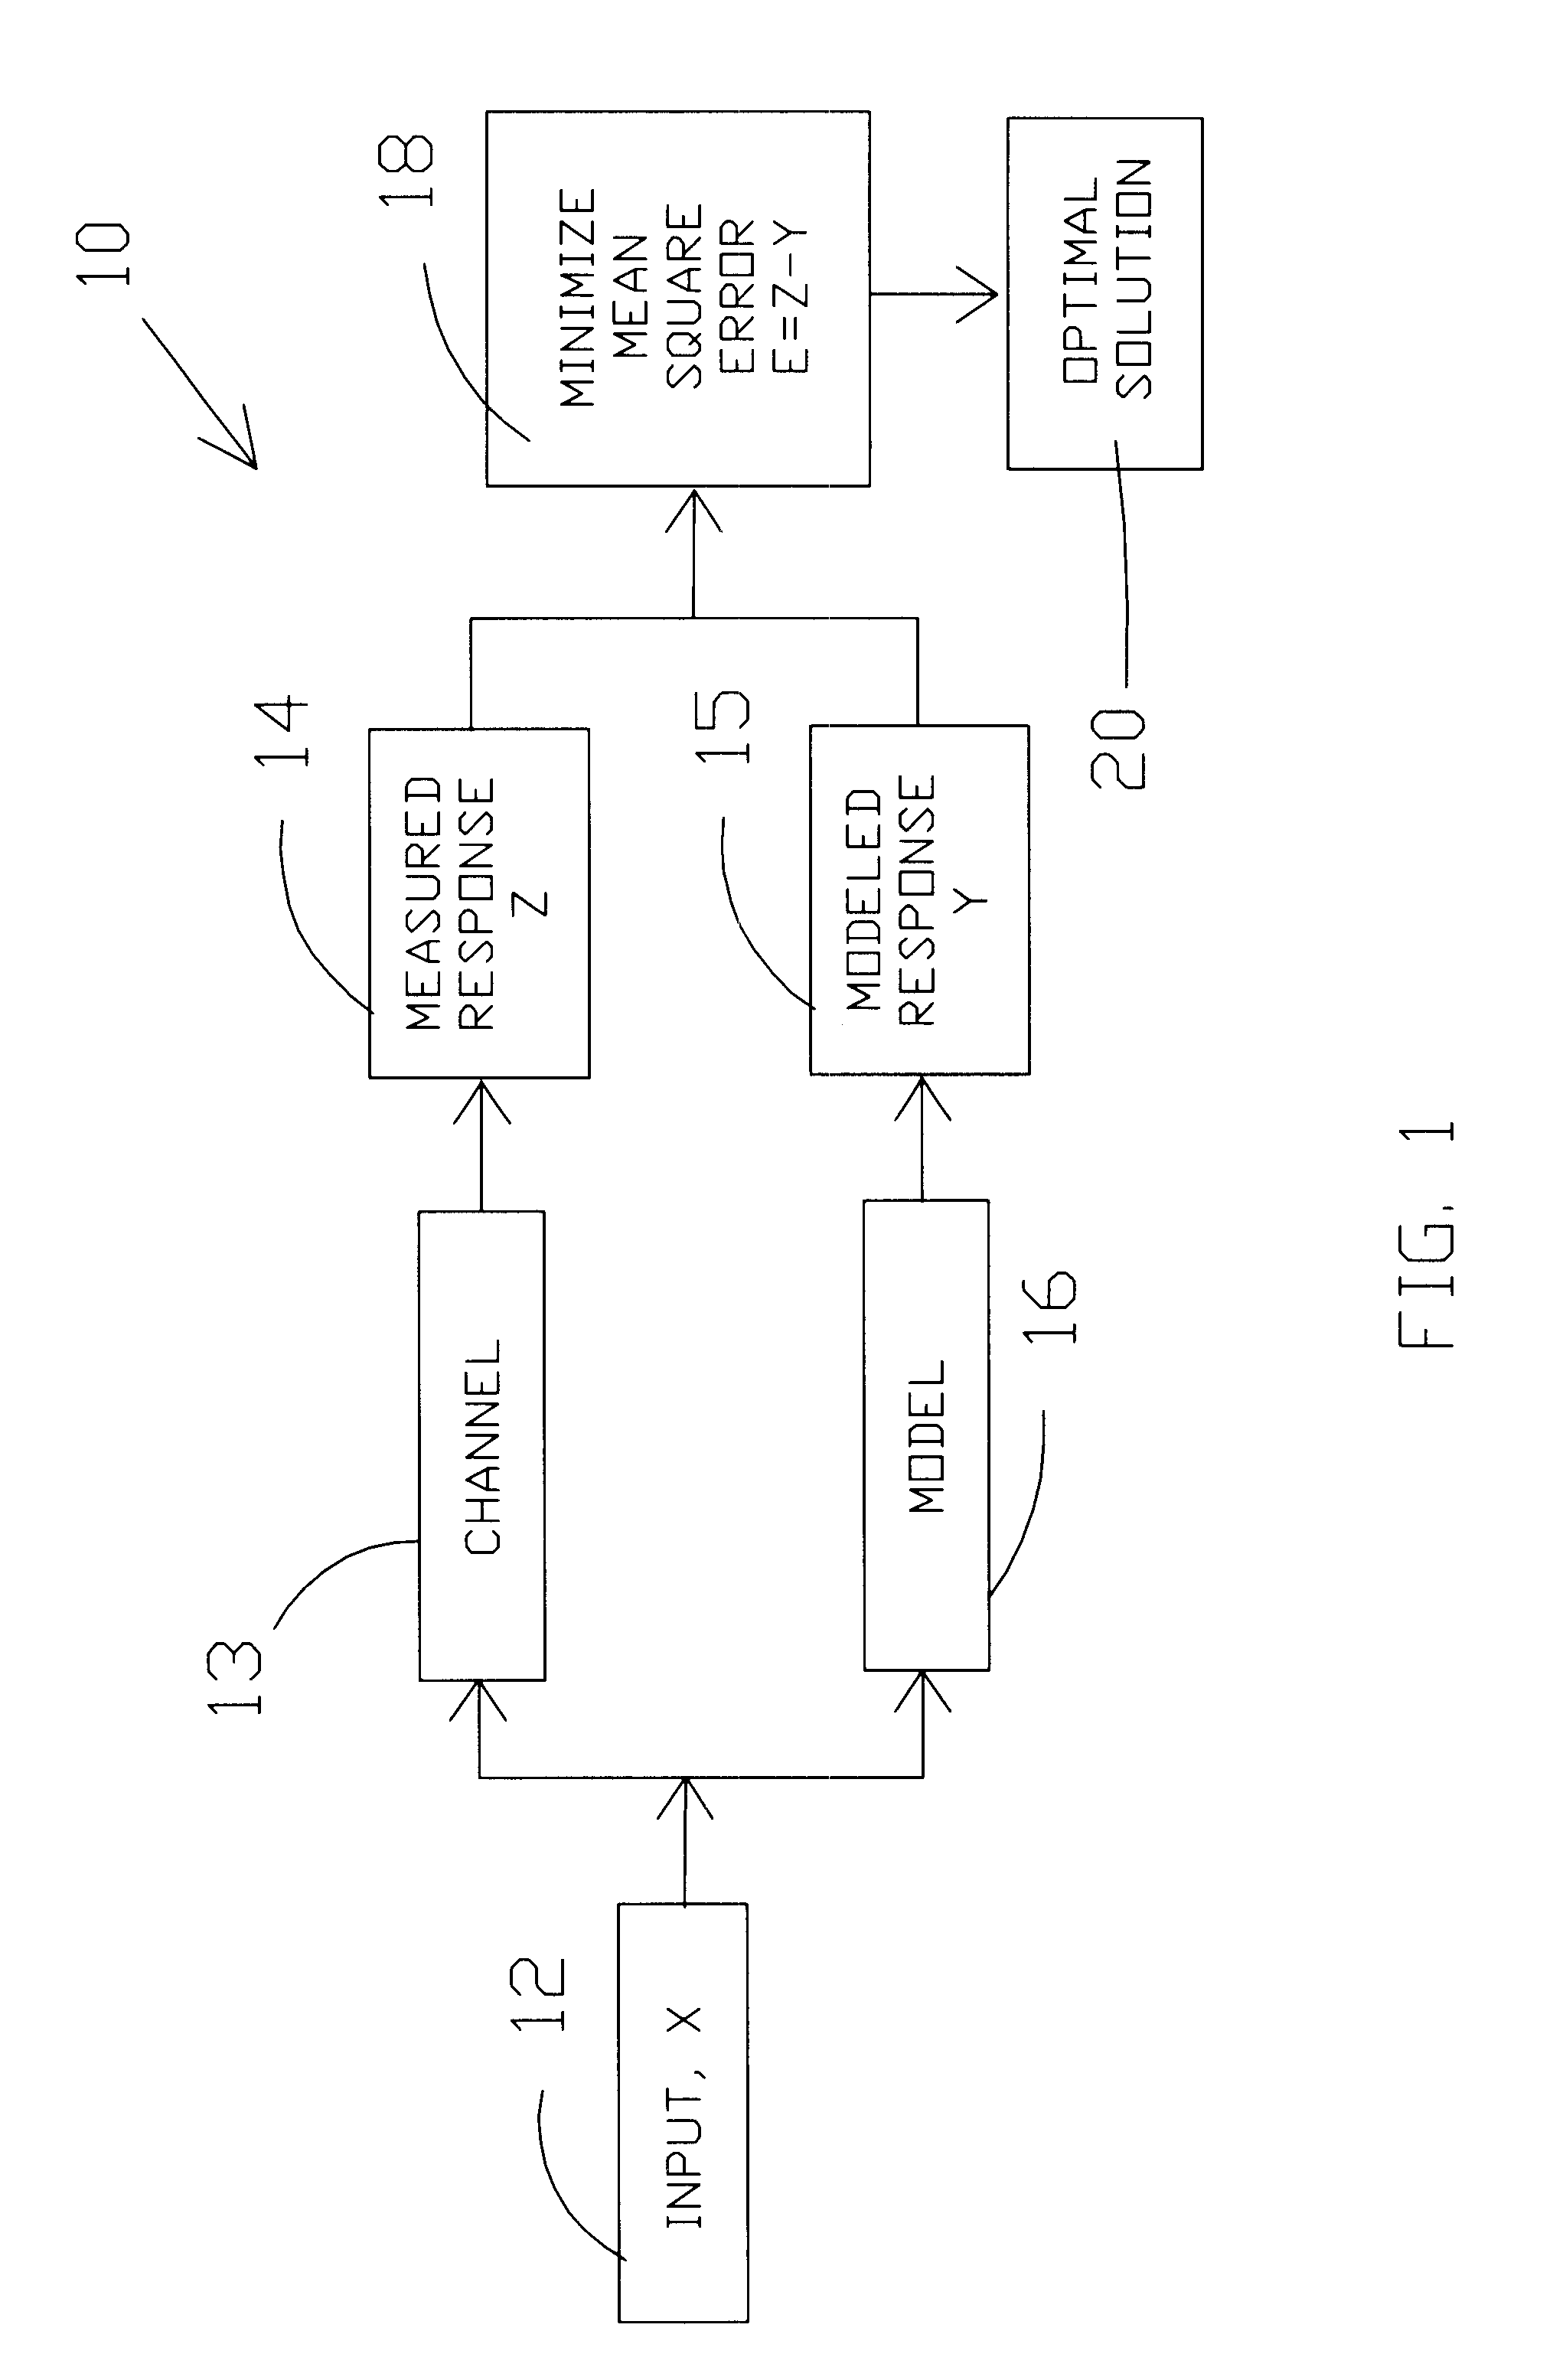 System and method for active sonar signal detection and classification